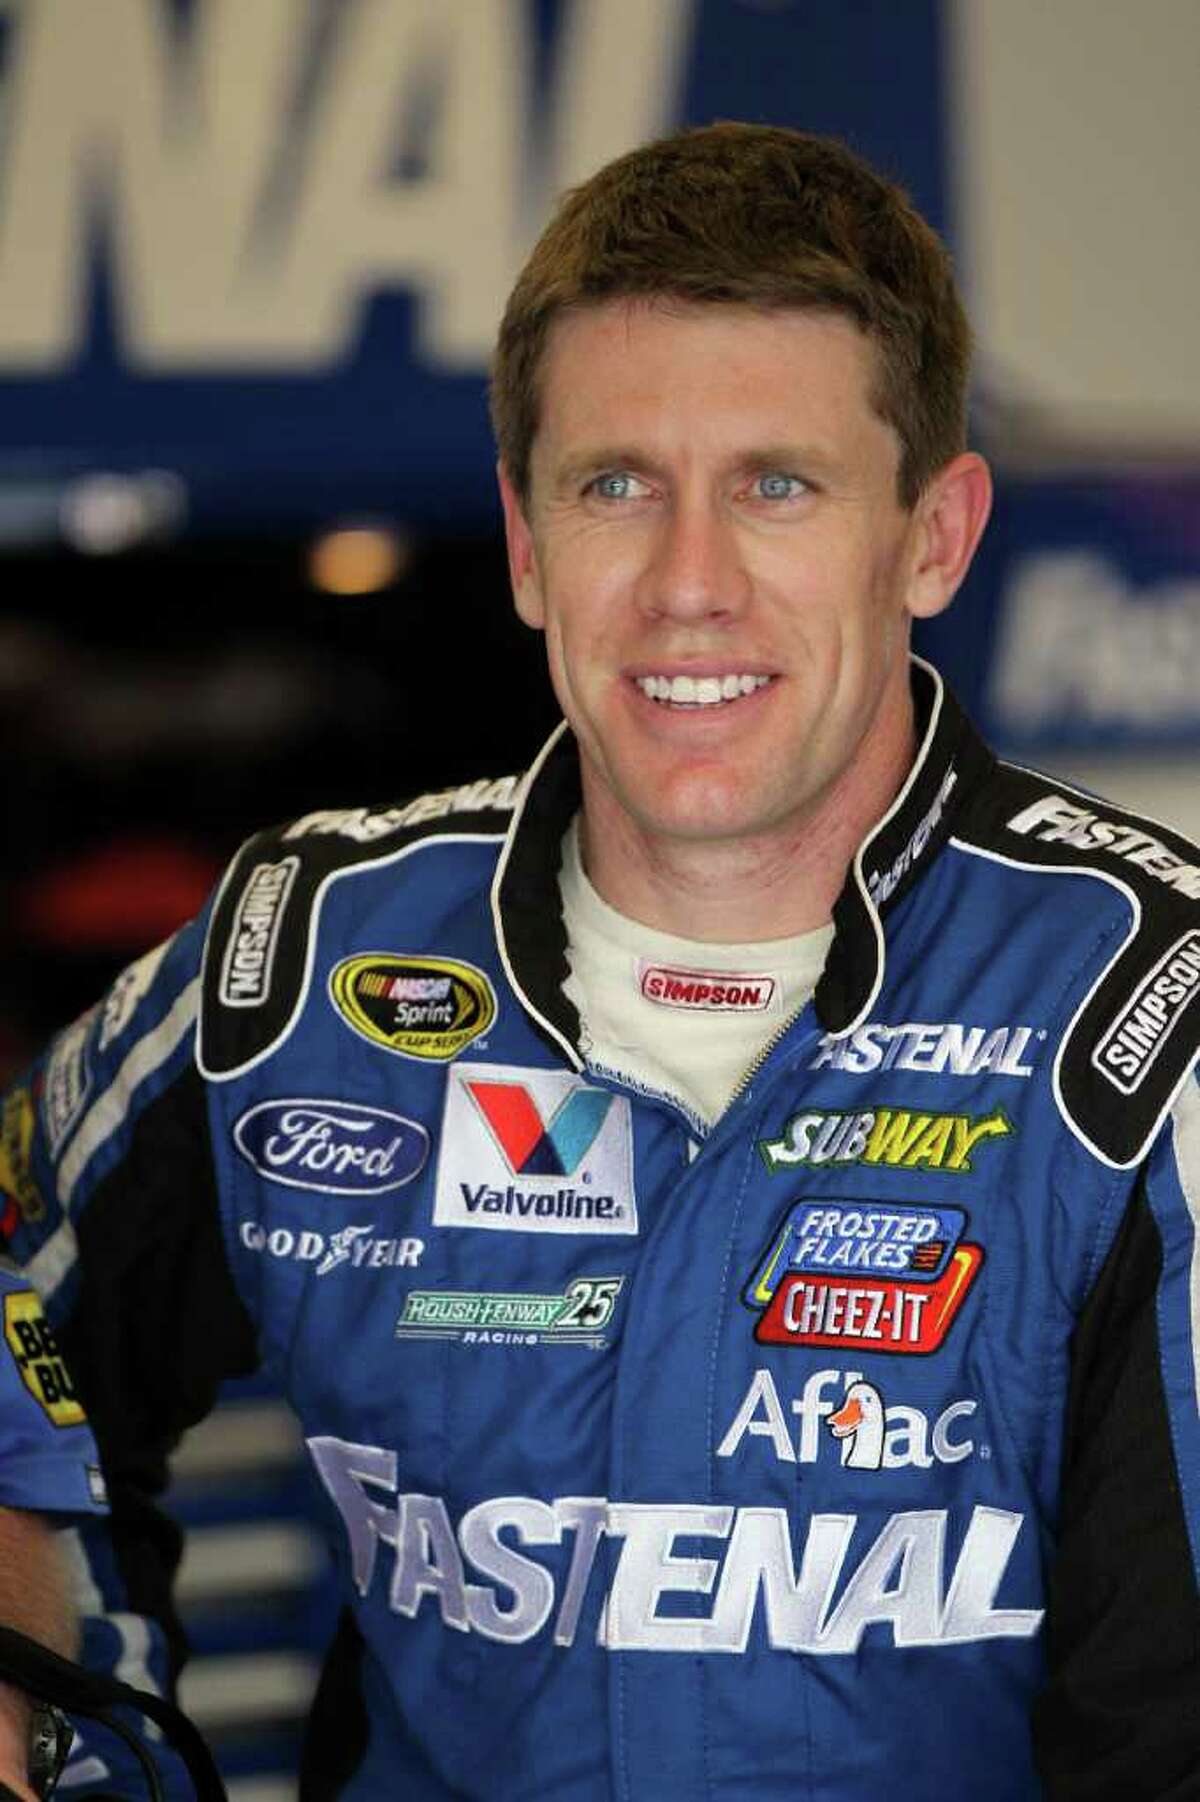 DAYTONA BEACH, FL - FEBRUARY 18: Carl Edwards, driver of the #99 Fastenal Ford, stands in the garage during practice for the NASCAR Sprint Cup Series Daytona 500 at Daytona International Speedway on February 18, 2012 in Daytona Beach, Florida. (Photo by Jamie Squire/Getty Images)